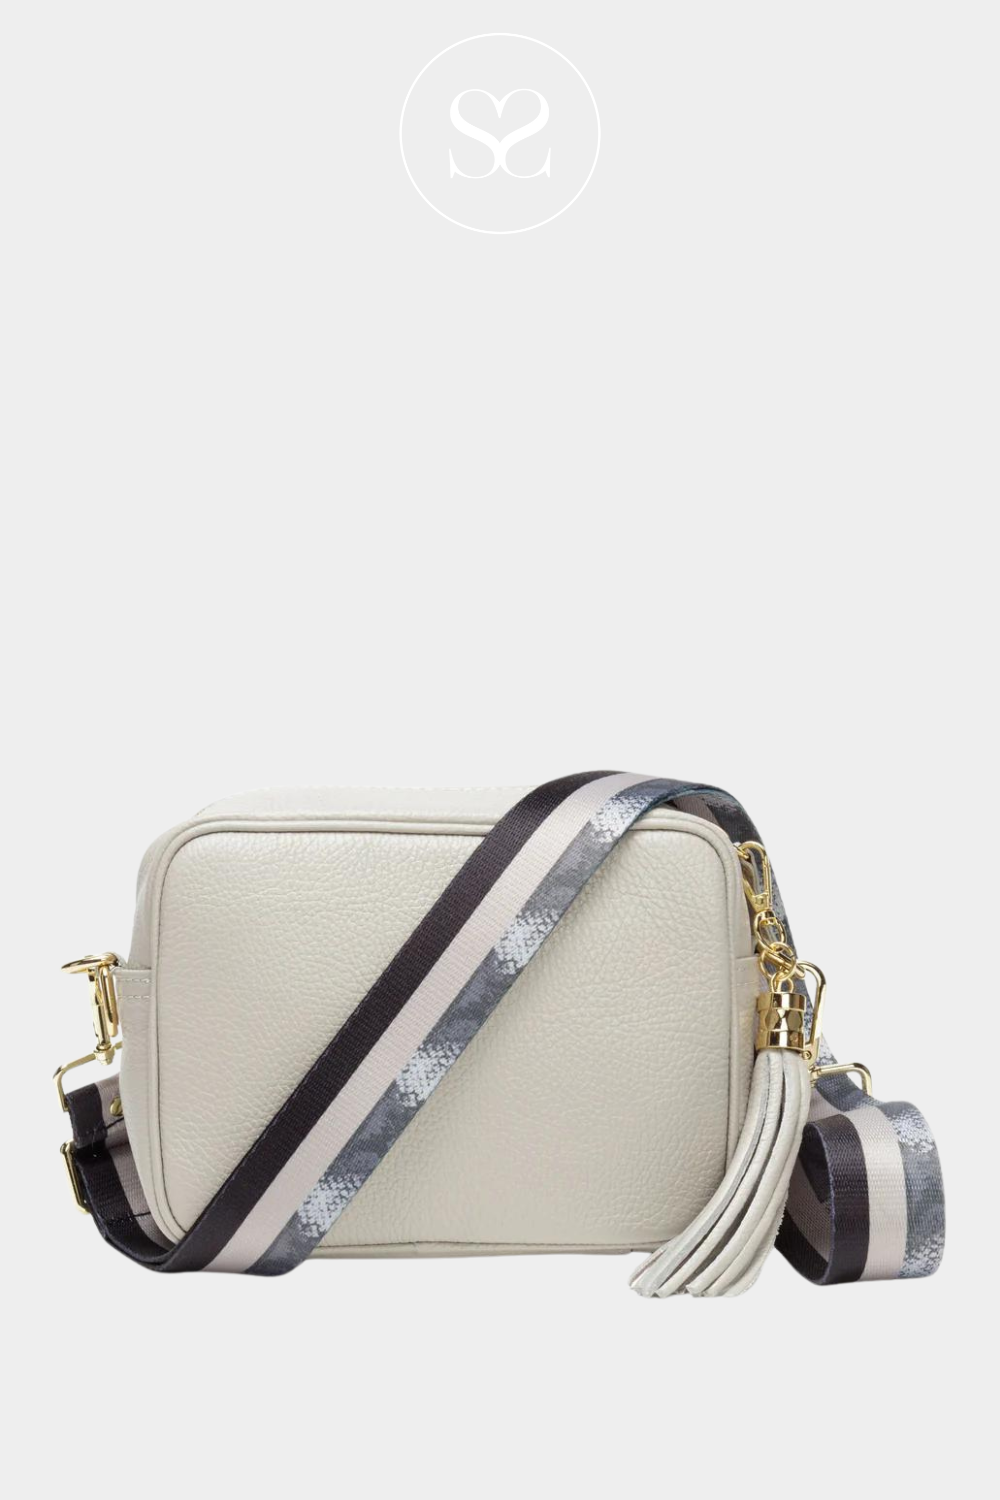 ELIE BEAUMONT LIGHT GREY LEATHER CROSSBODY BAG WITH TASSEL AND GOLD HARDWARE